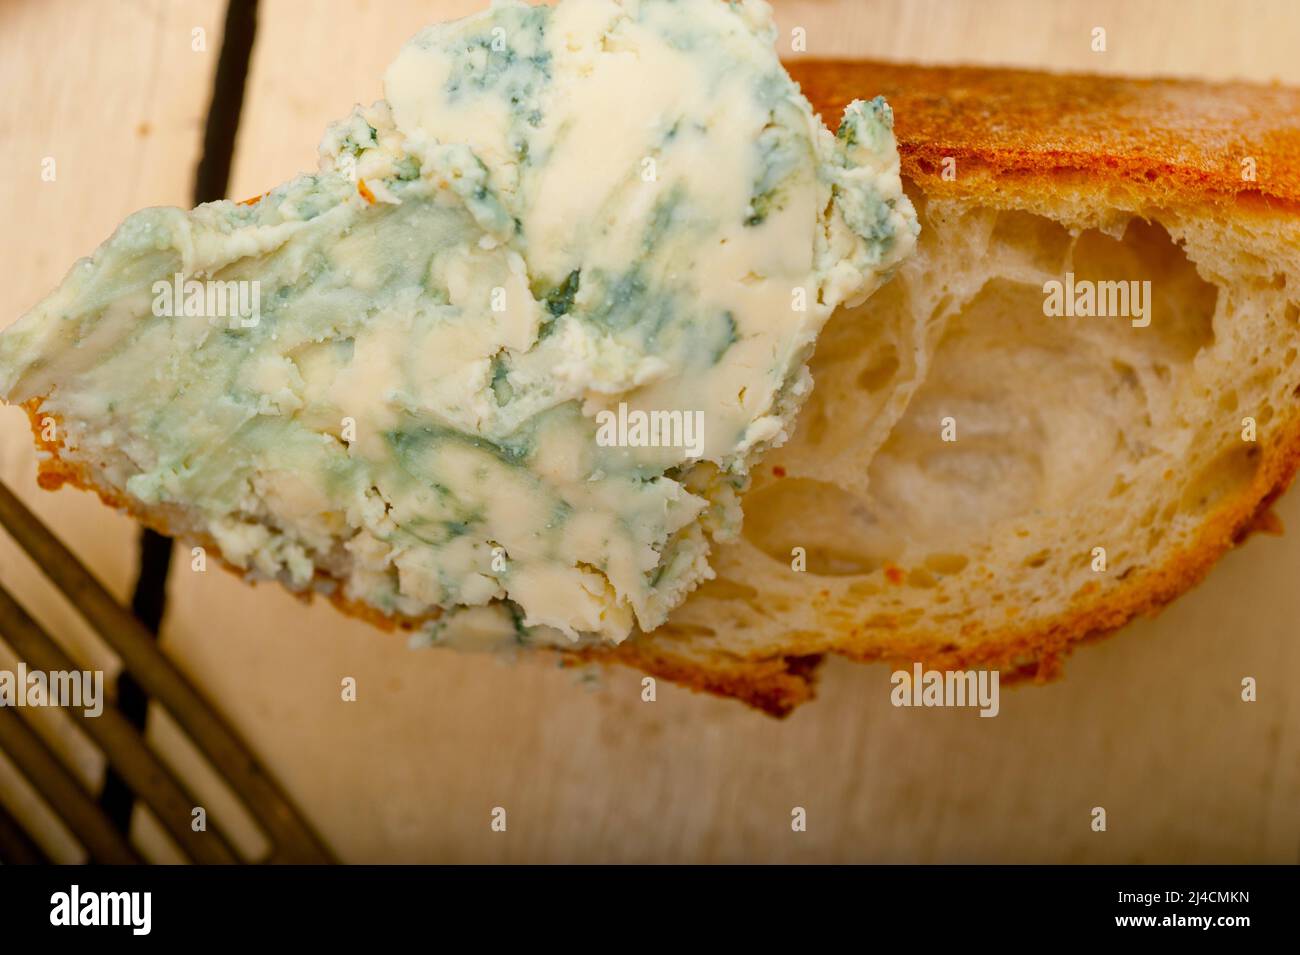 Fresh blue cheese spread ove french baguette with cherry tomatoes on side Stock Photo